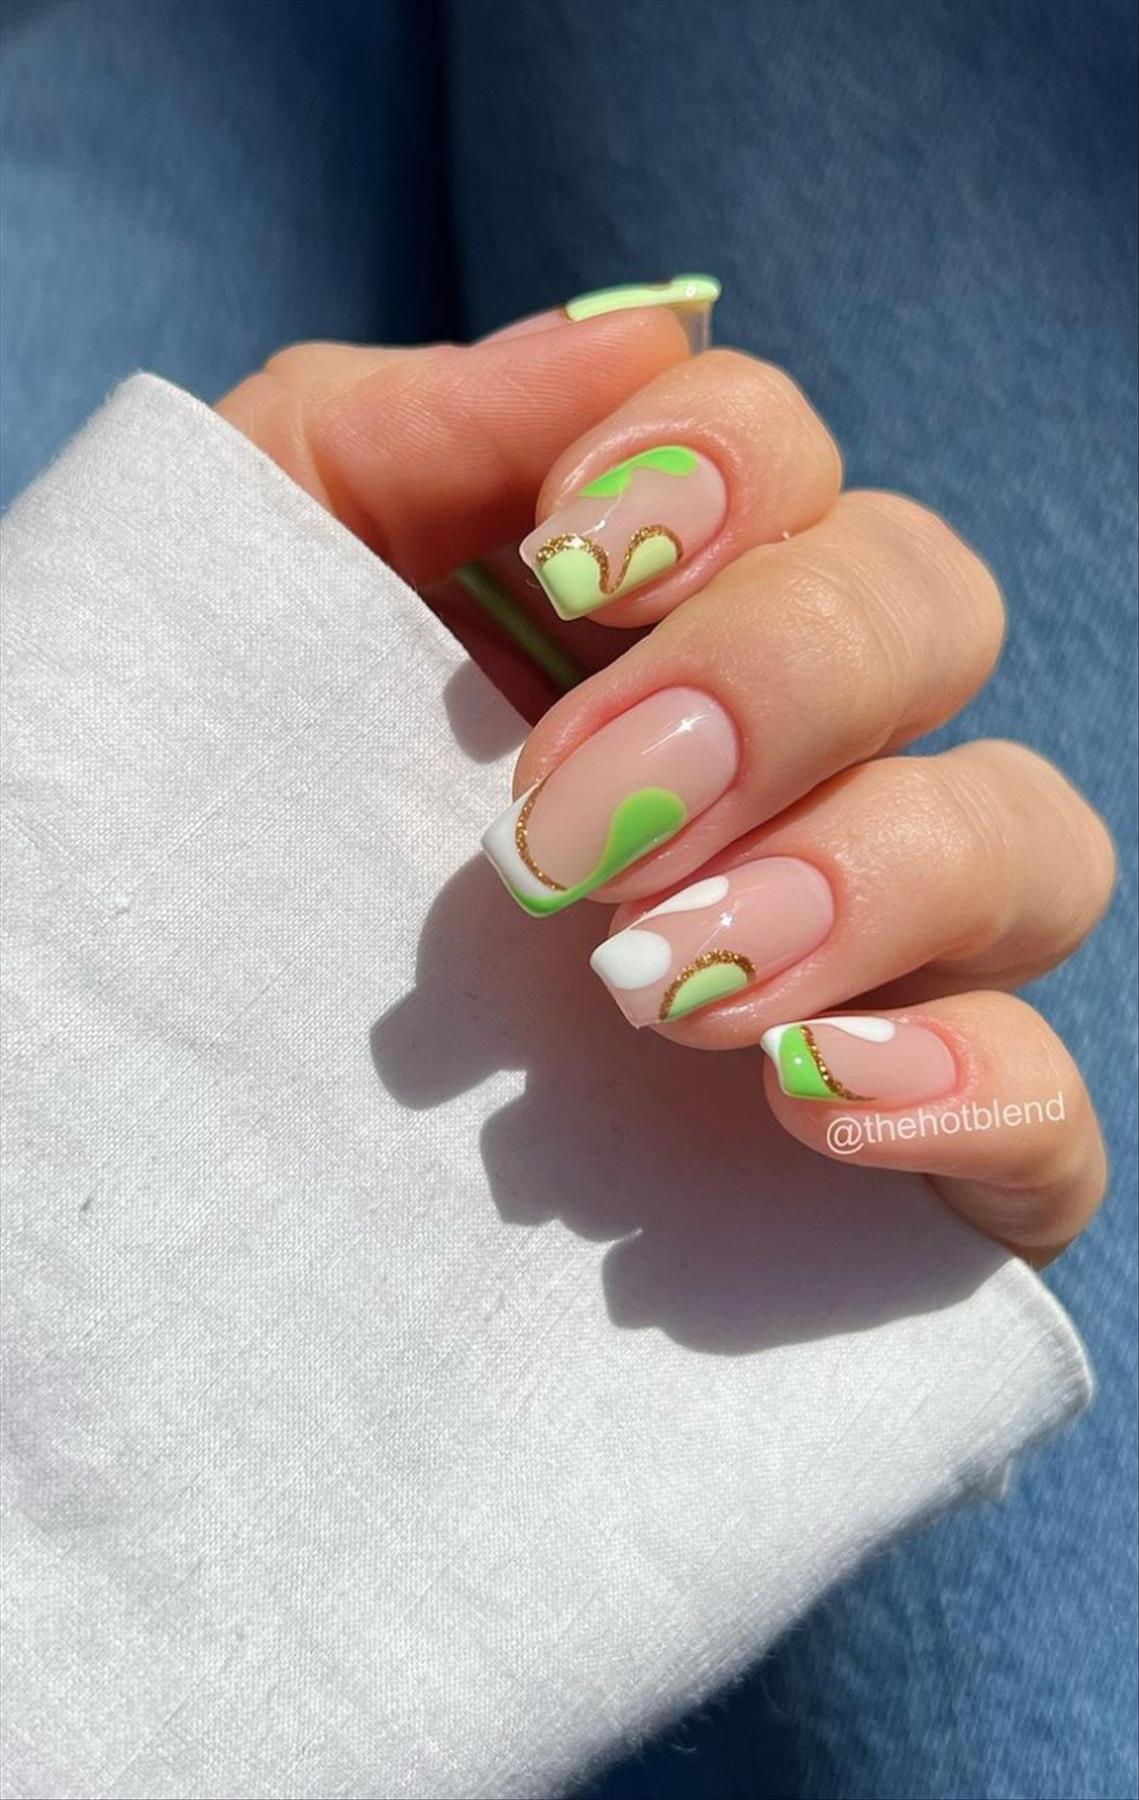 Best & Simple short coffin nails ideas for Summer manicures inspo